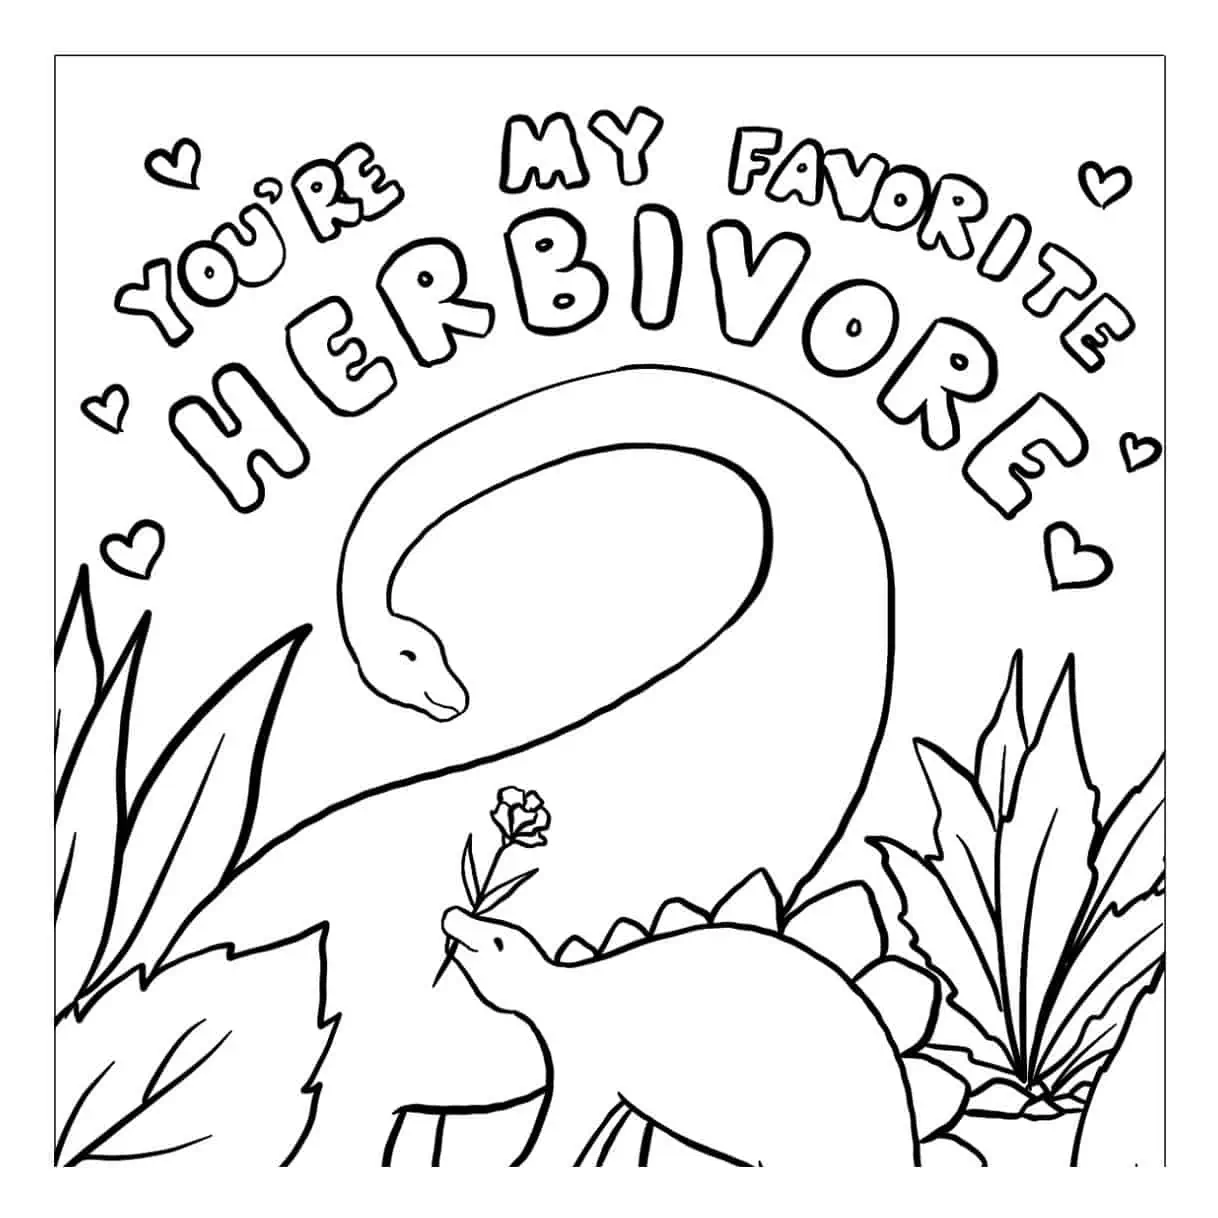 A cute vegan Valentine's Day coloring page featuring two herbivore dinosaurs and the words "you're my favorite herbivore."